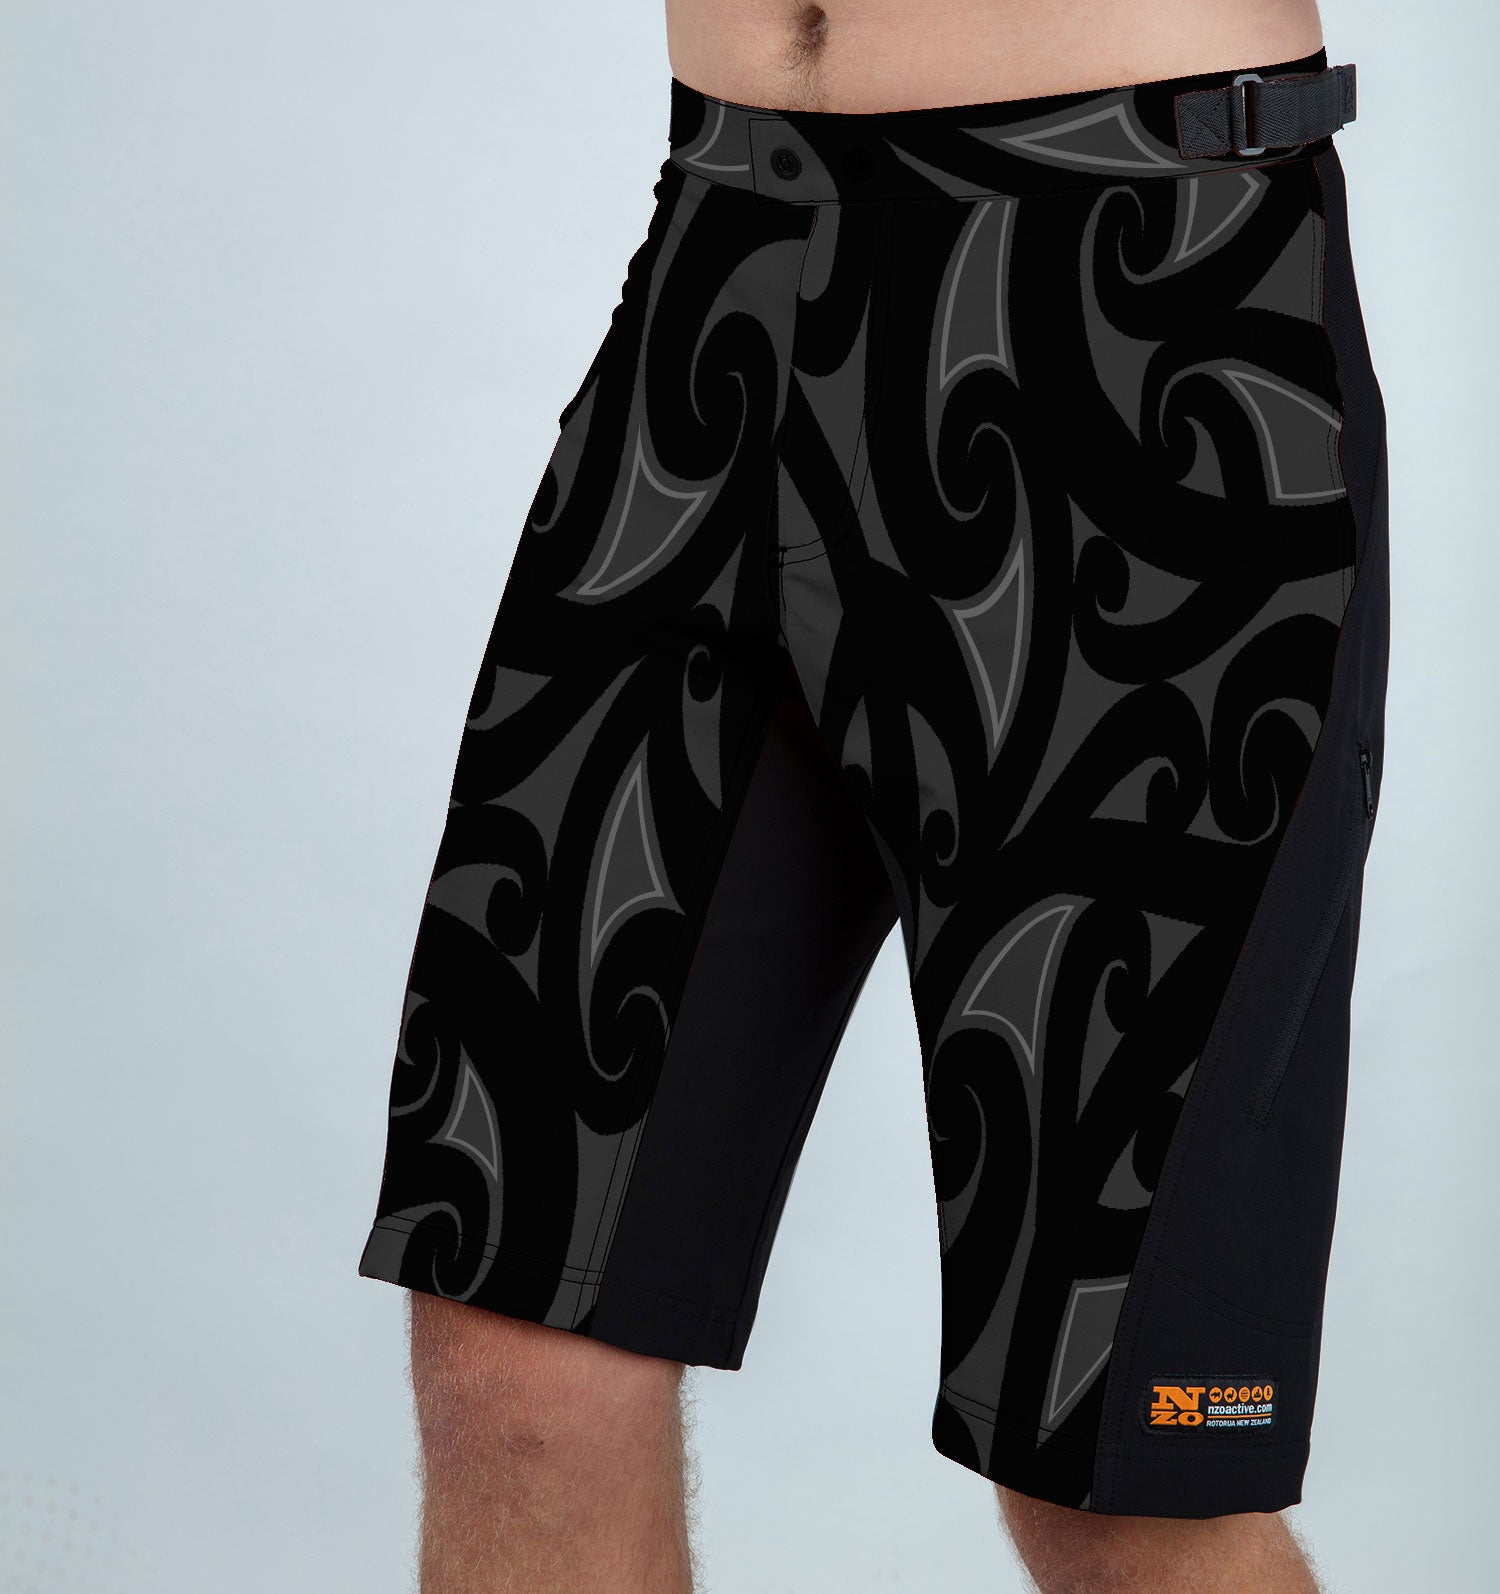 Burners - Men trail shorts - Limited Edition 04